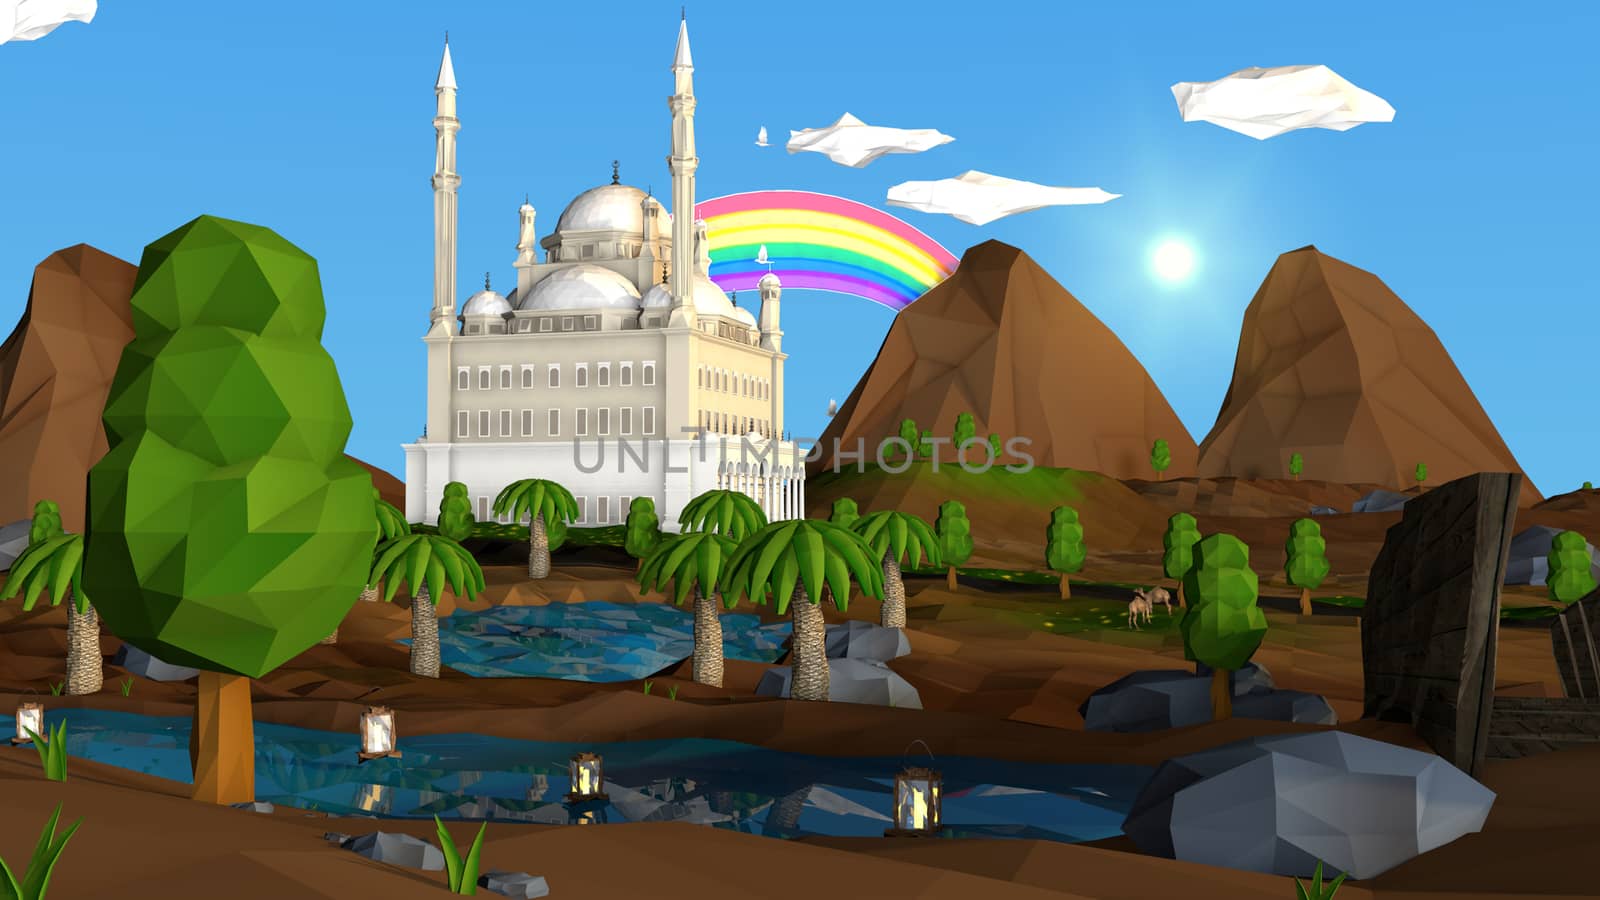 Low poly scene with mountains, trees, lanterns and a mosque 